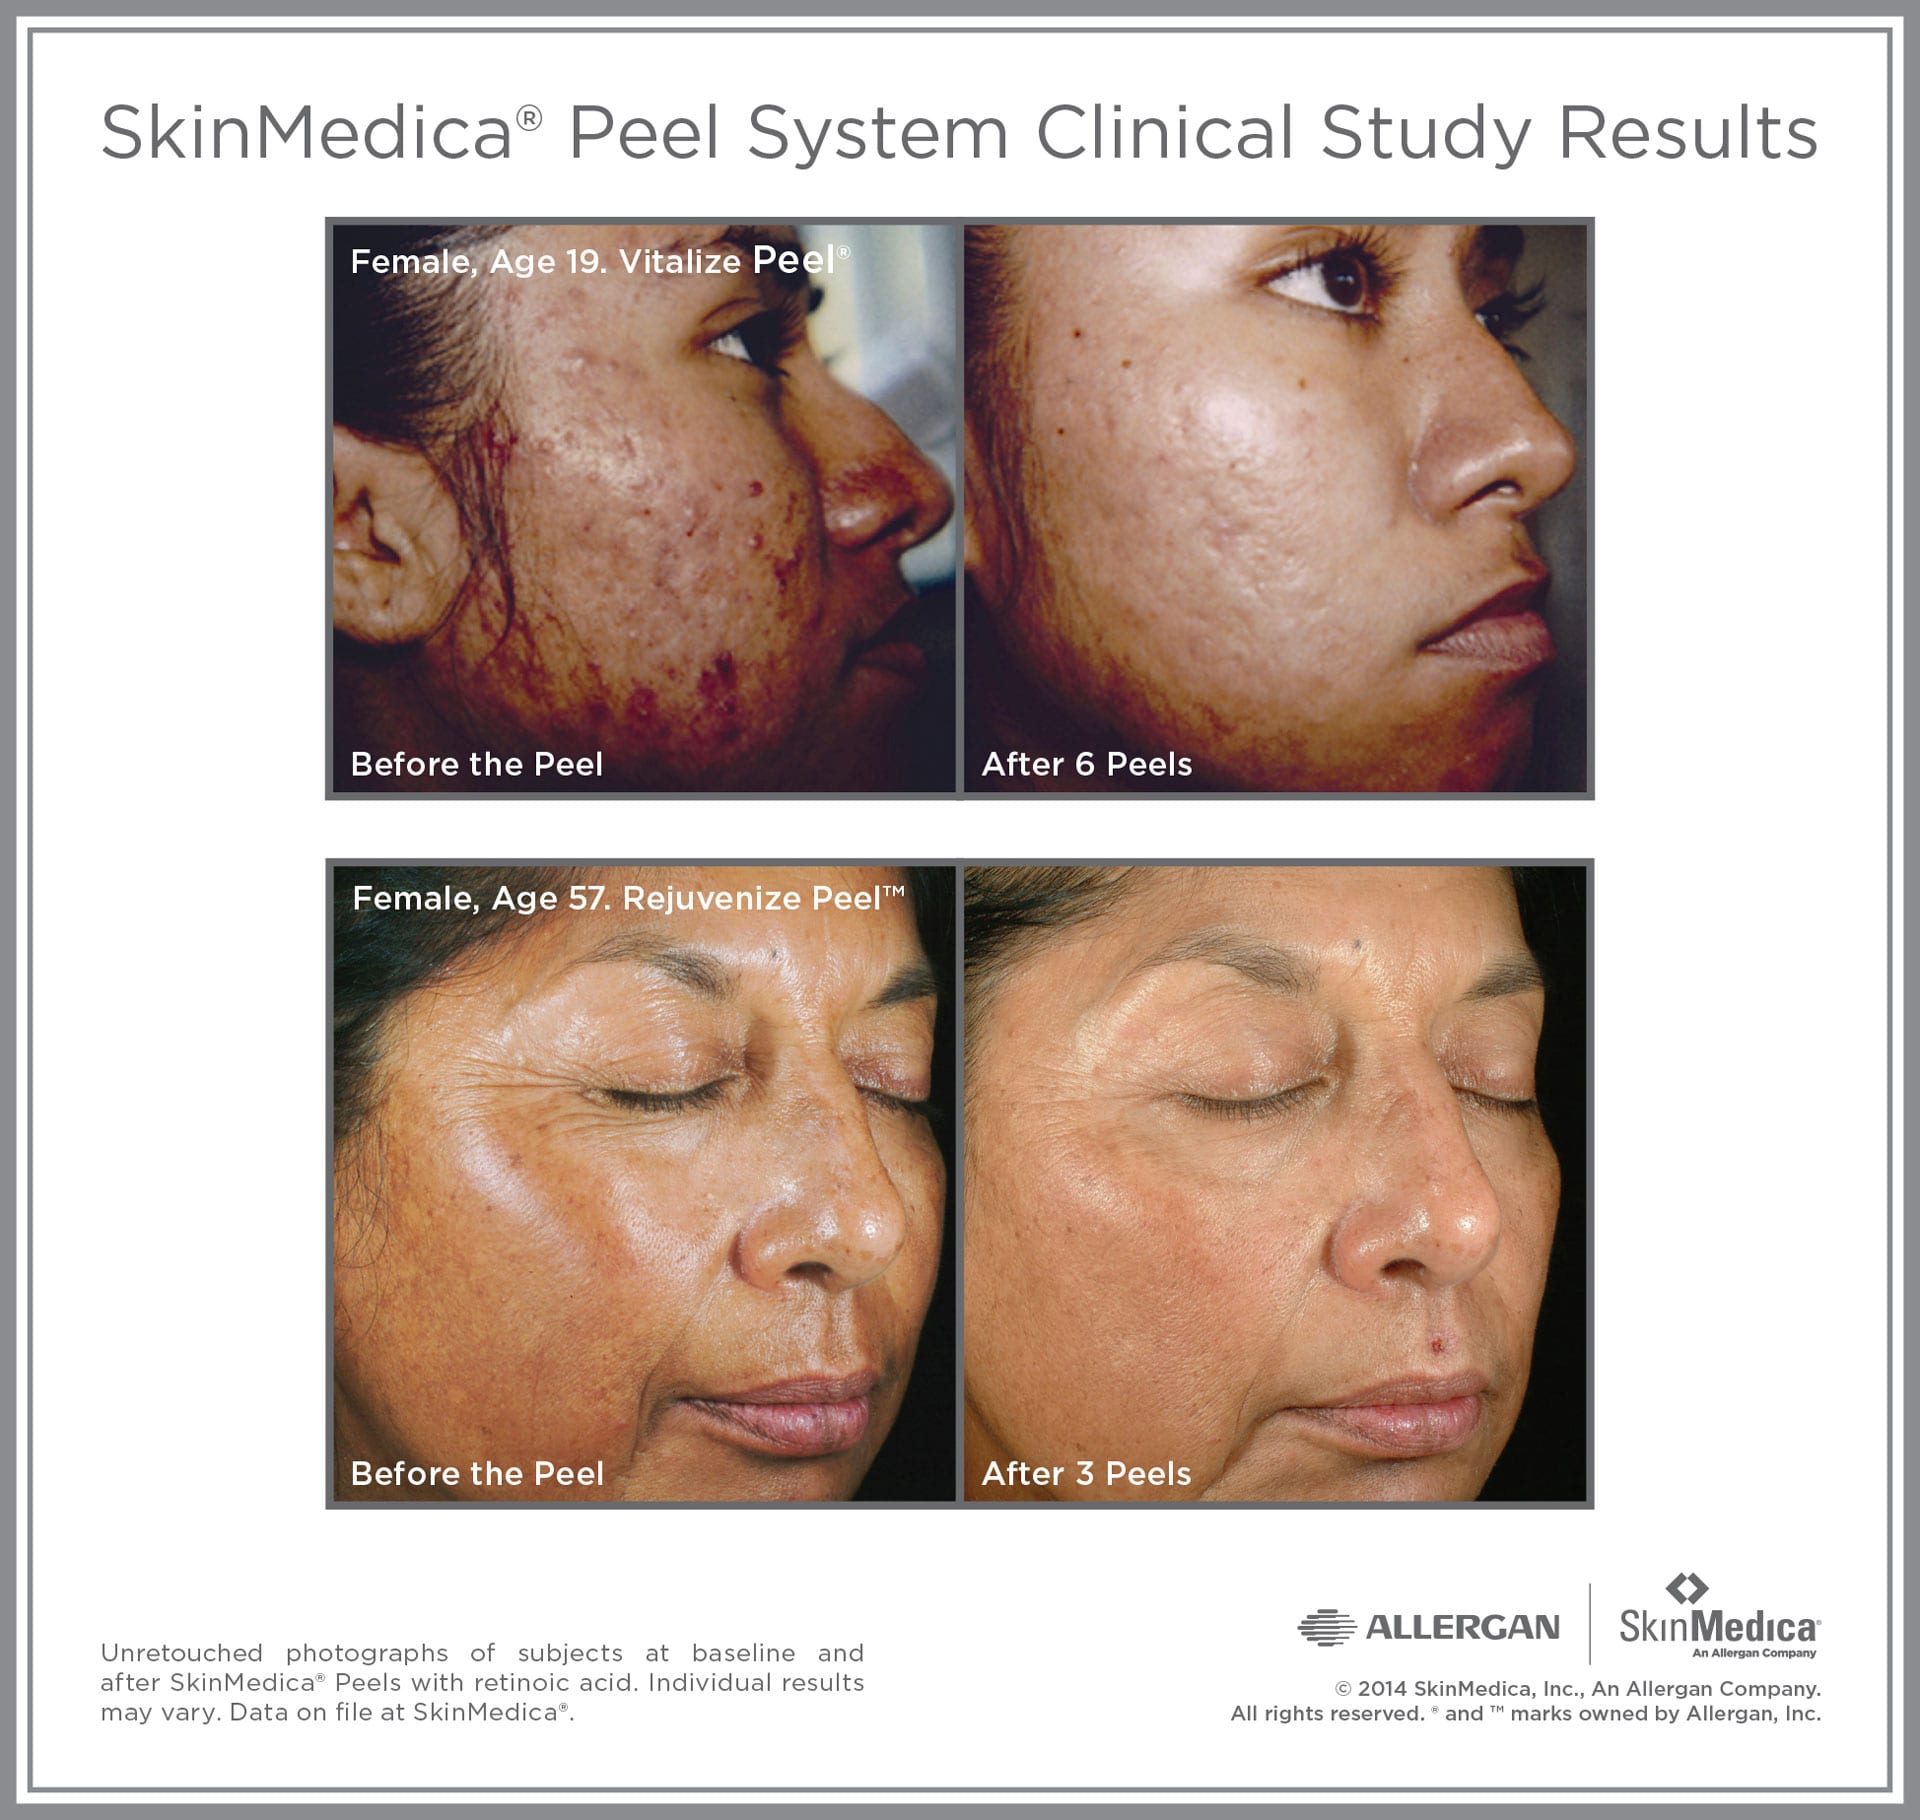 Vitalize Peel: Before and After